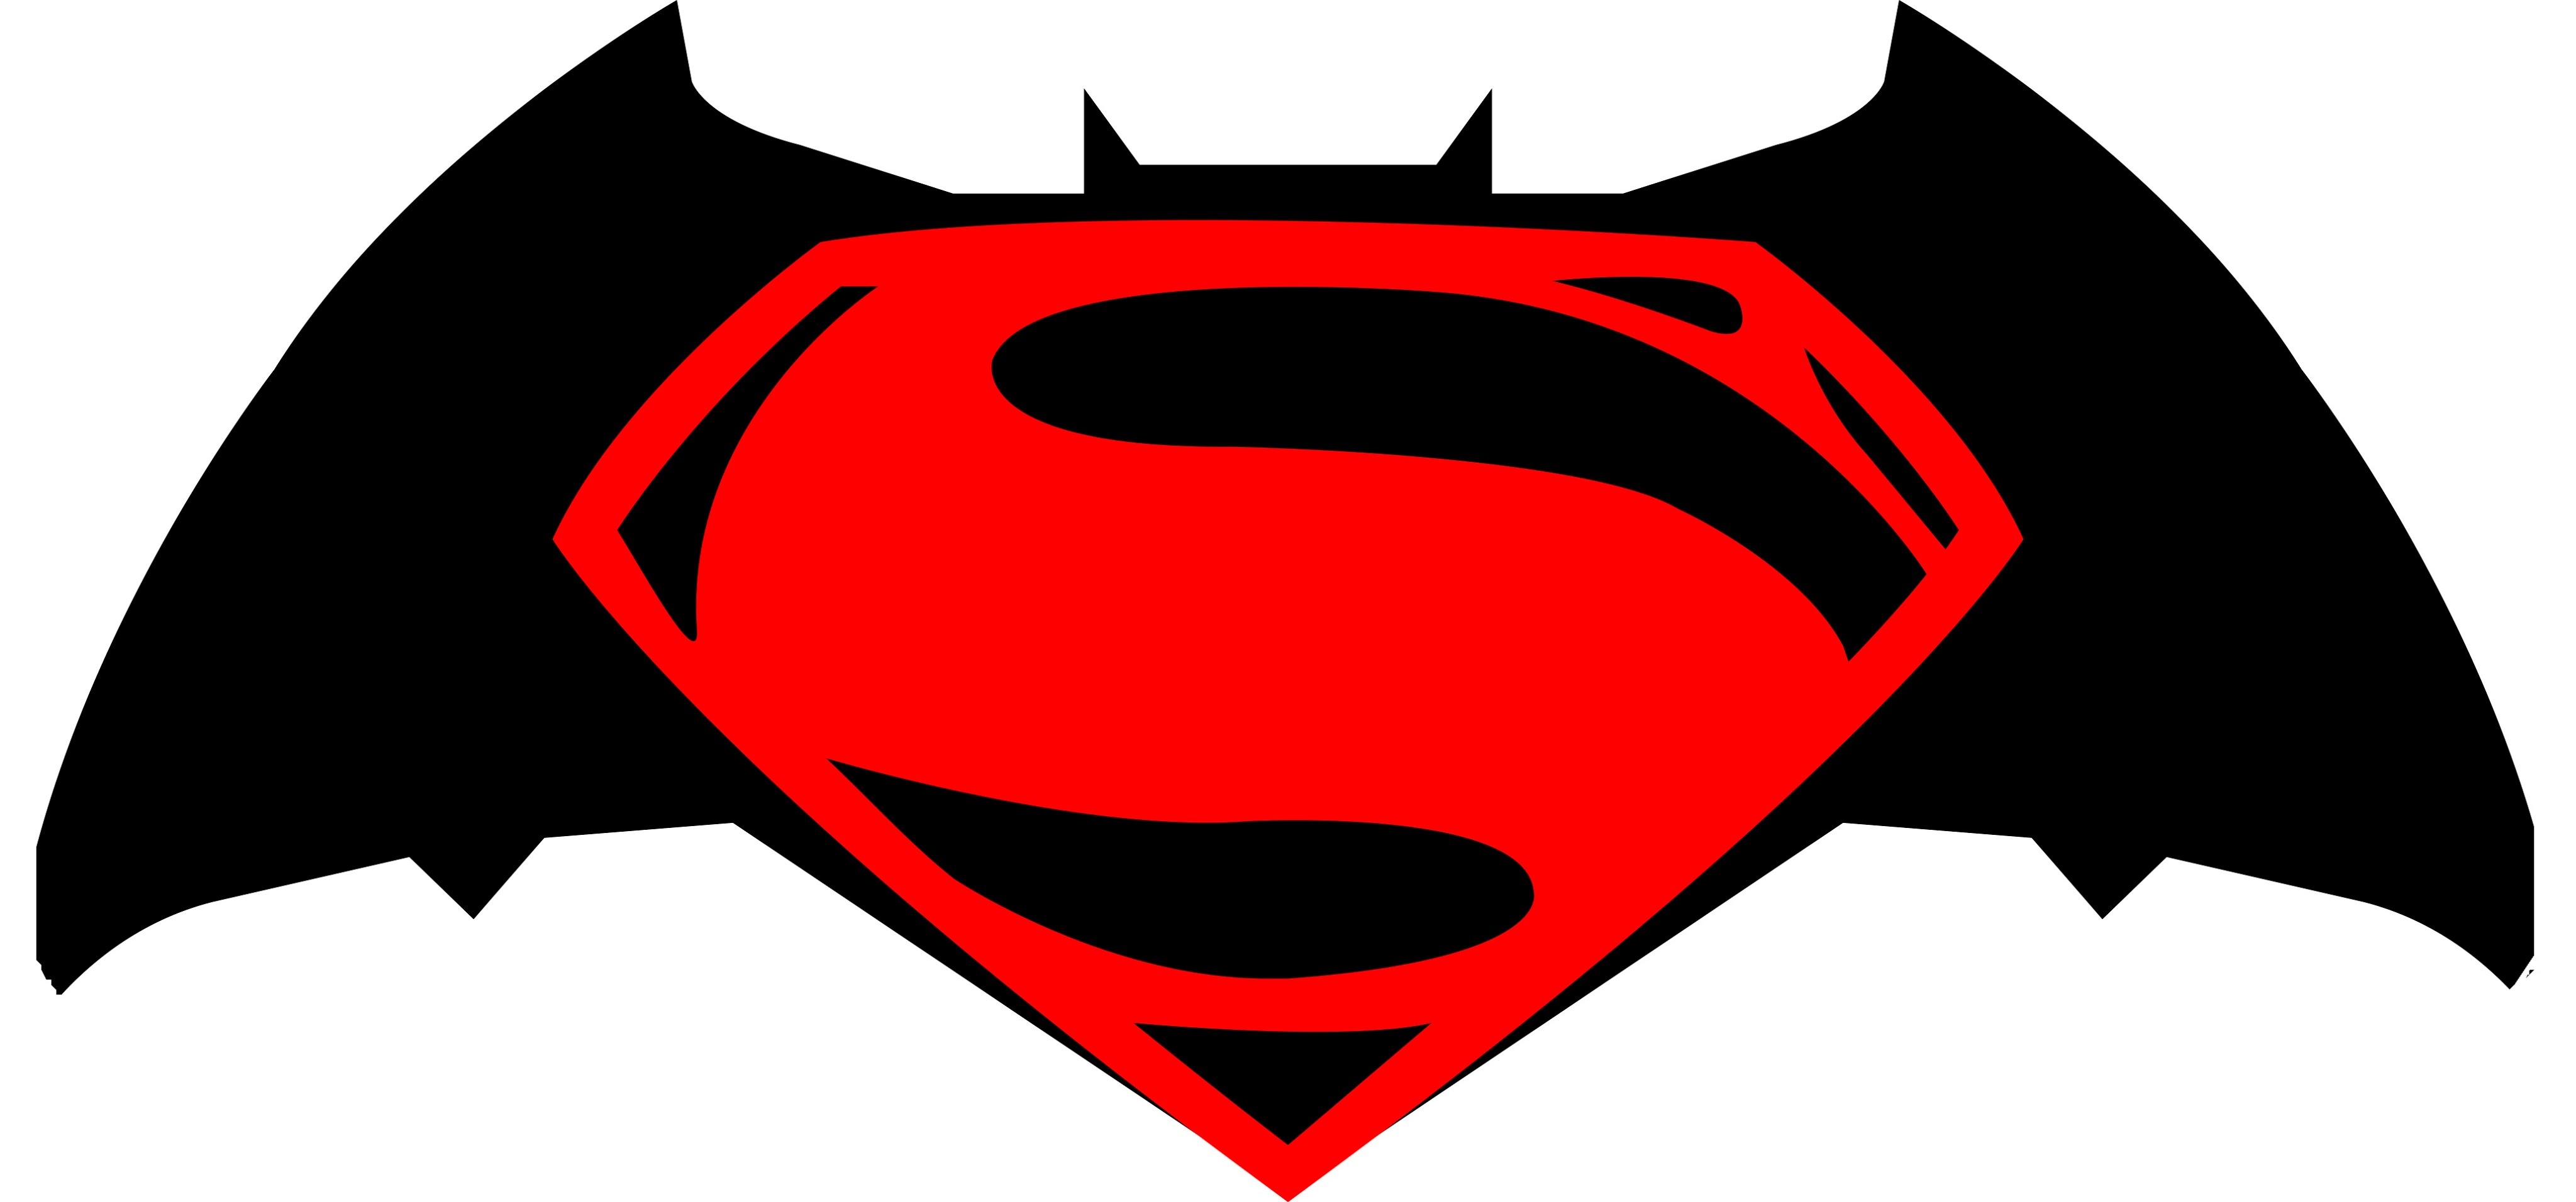 Drawing Logos - Batman V Superman: Dawn Of Justice - YouTube - ClipArt Best  - ClipArt Best